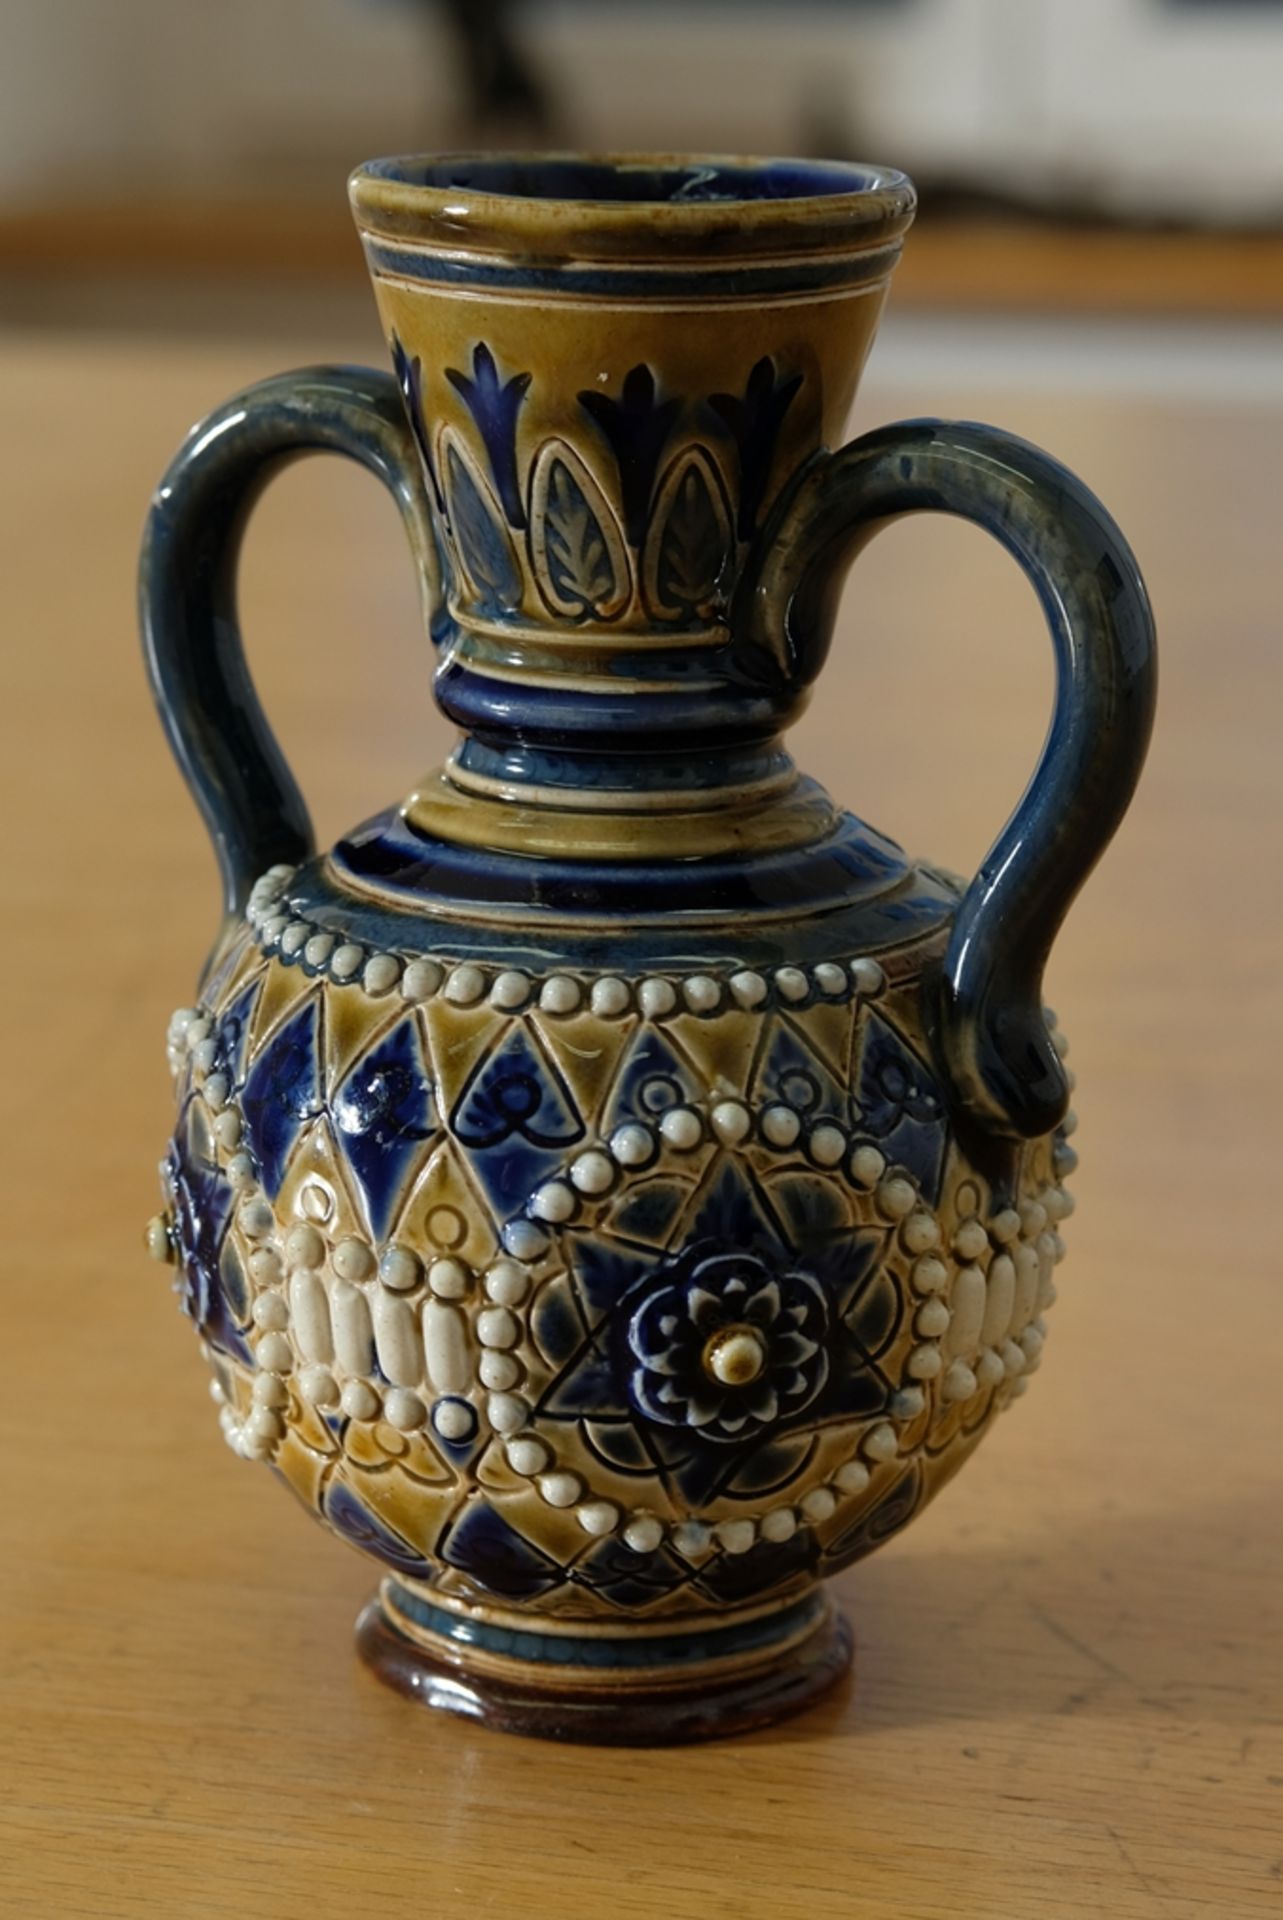 Doulton Lambeth vase, British. Vase with two handles, relief decoration. 1891-1910. height: 13 cm.